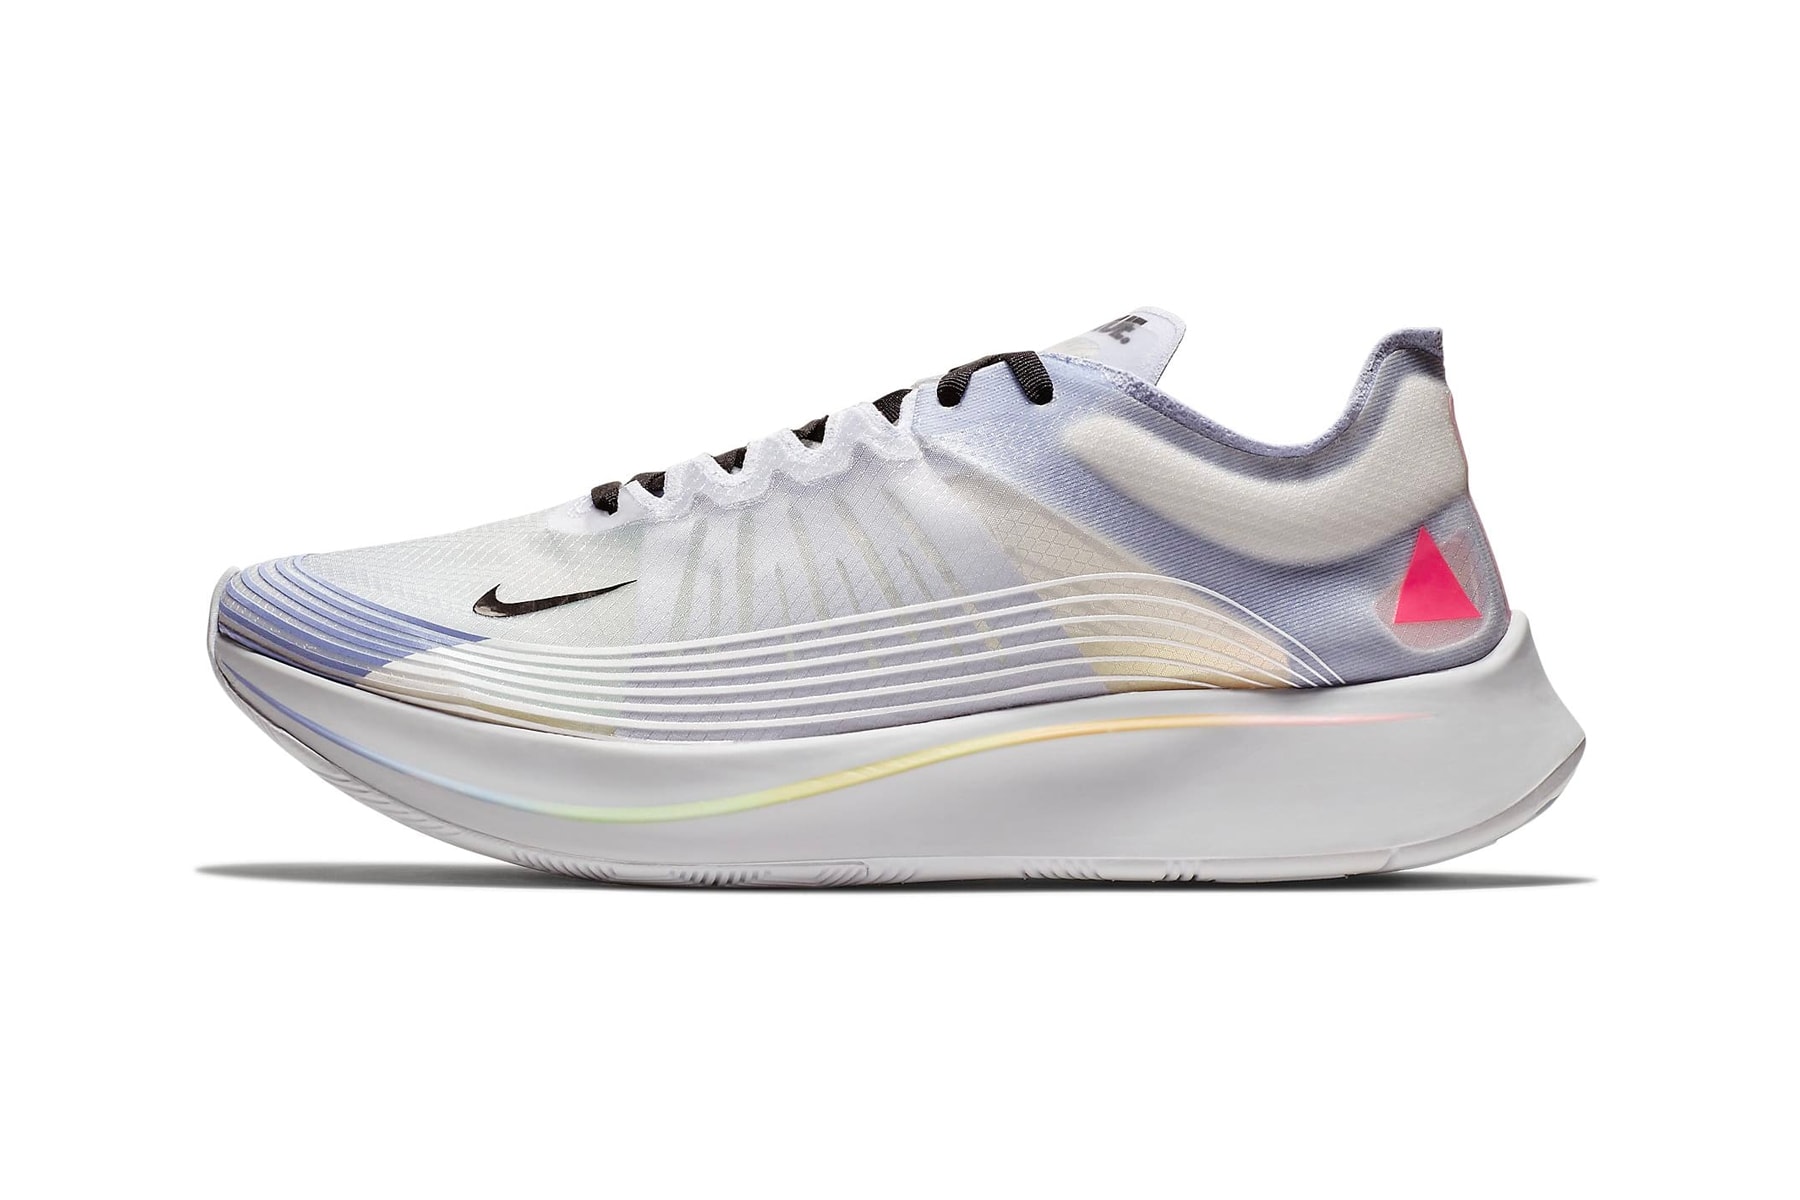 Capataz motor Espere A Closer Look at the Nike "BETRUE" Zoom Fly | Hypebeast